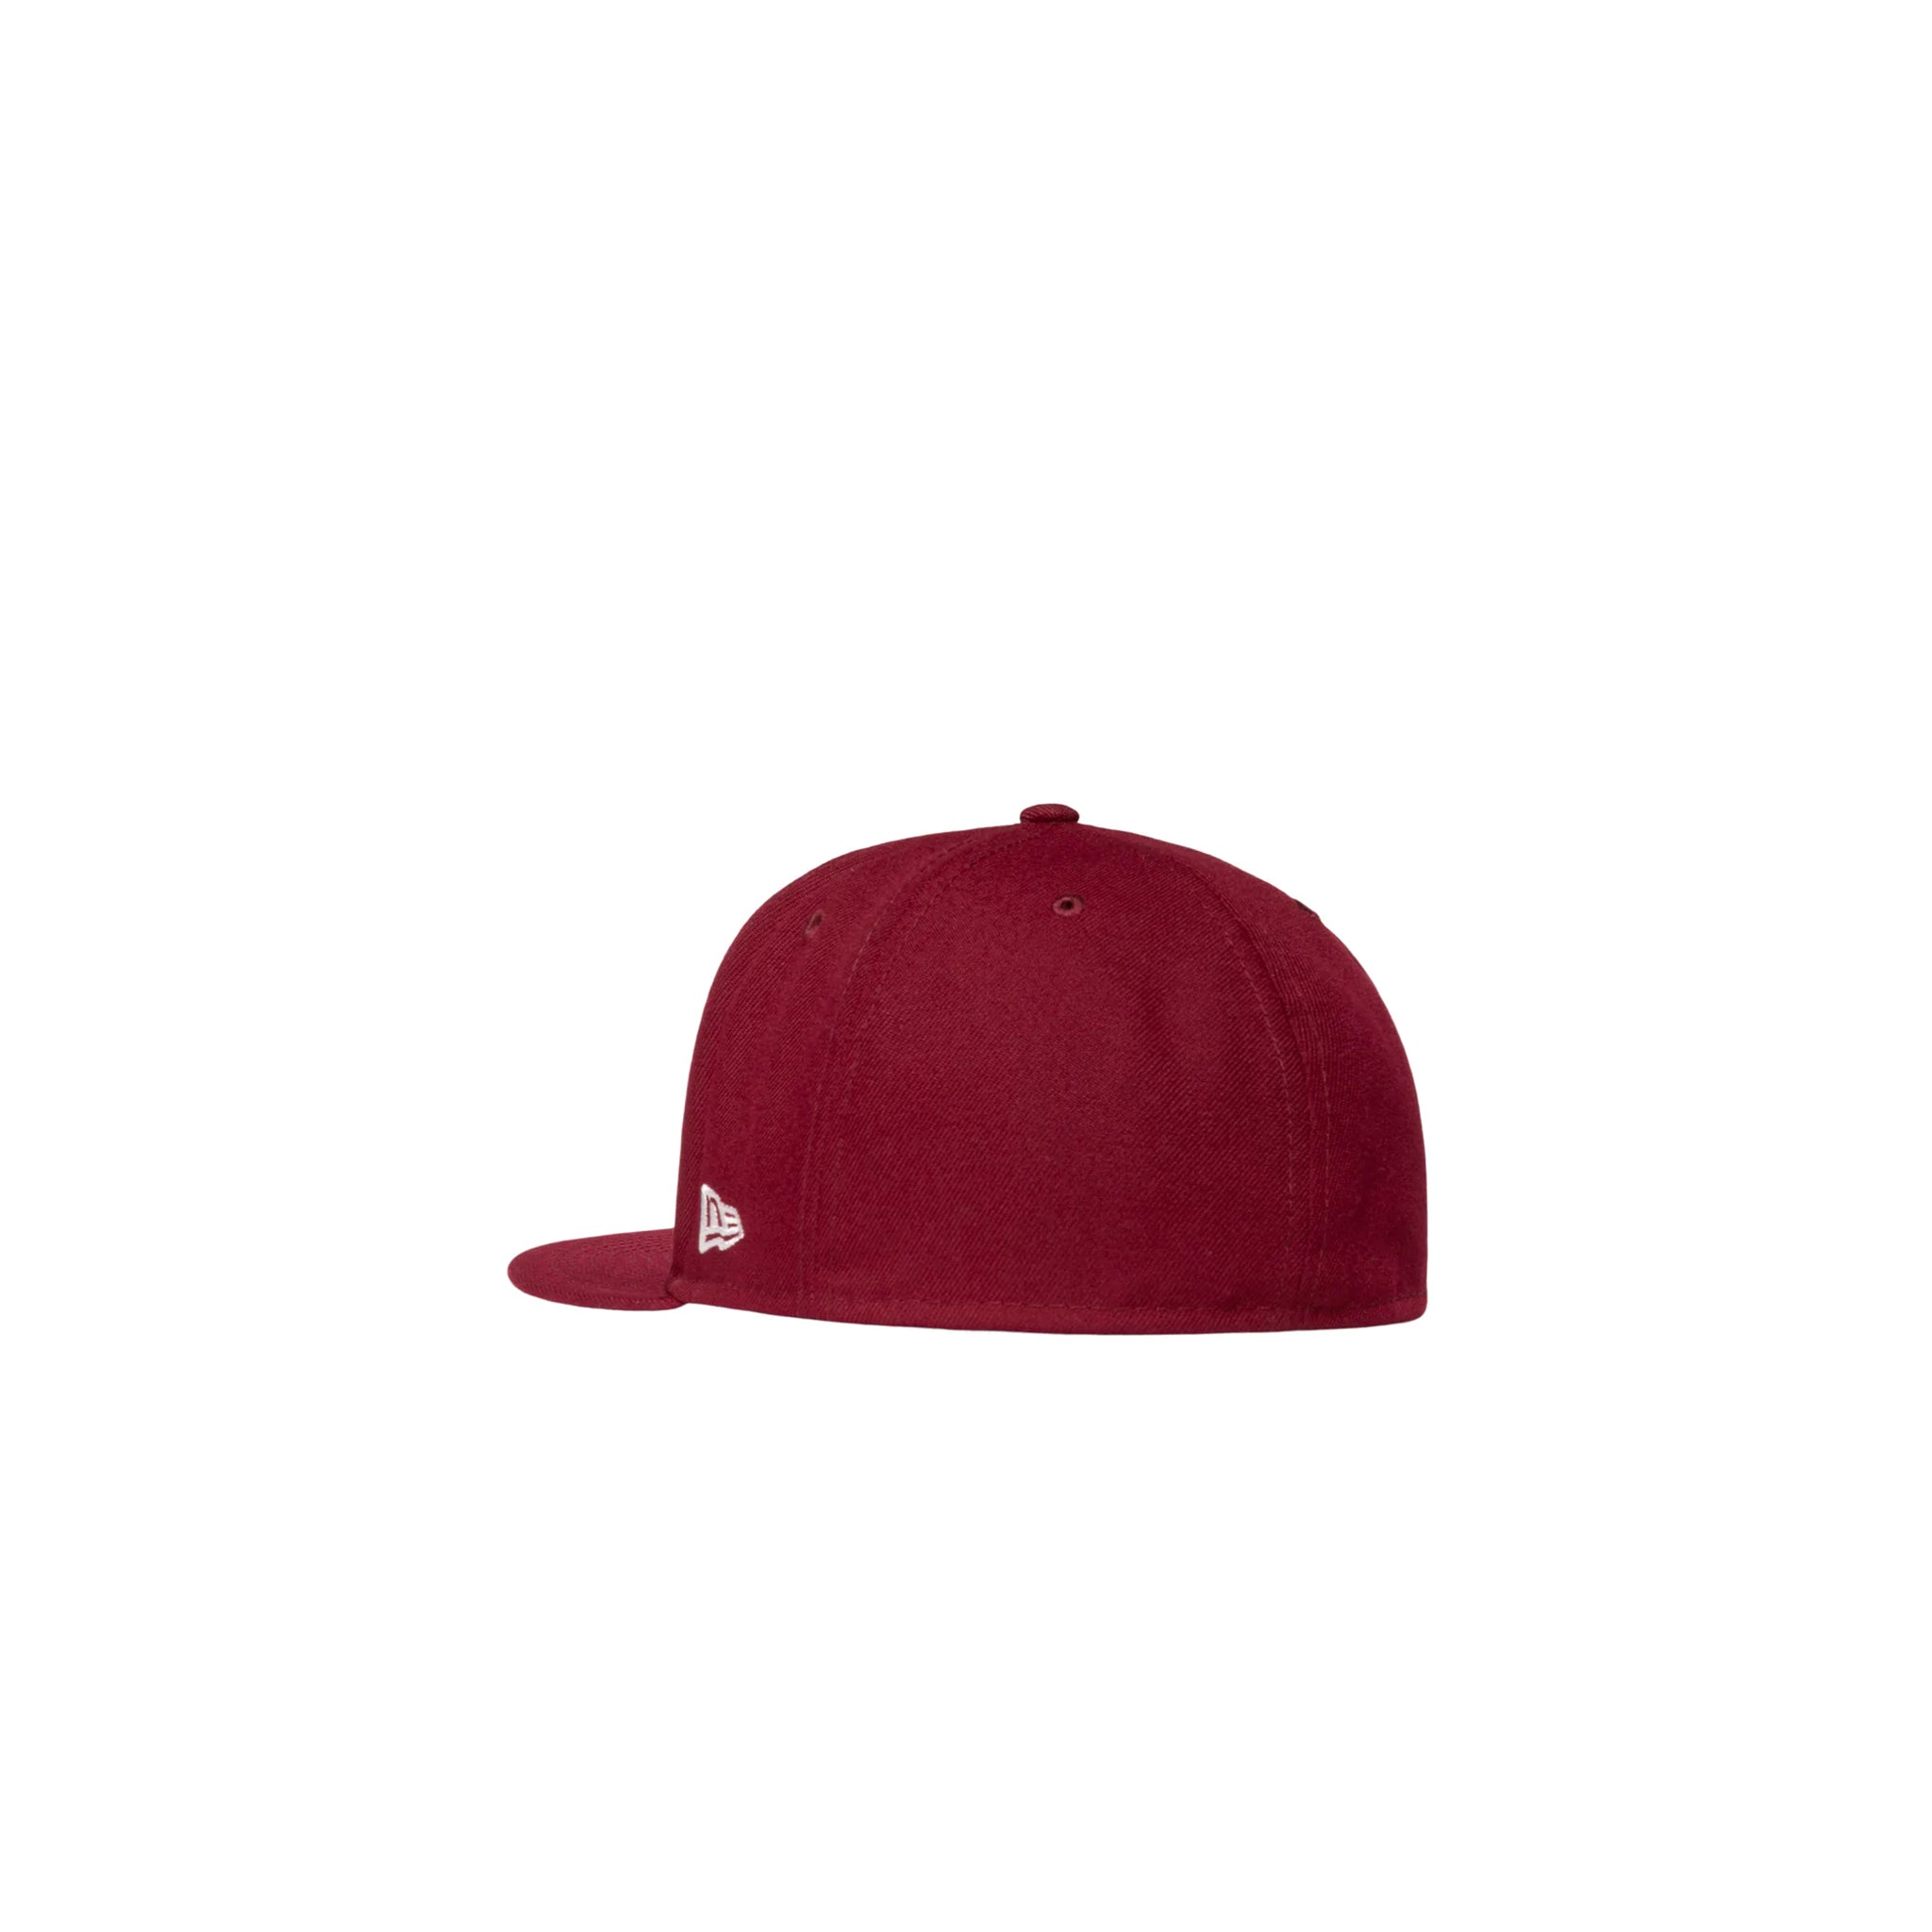 Stussy Authentic New Era Fifty Cap Cardinal – Story Cape Town